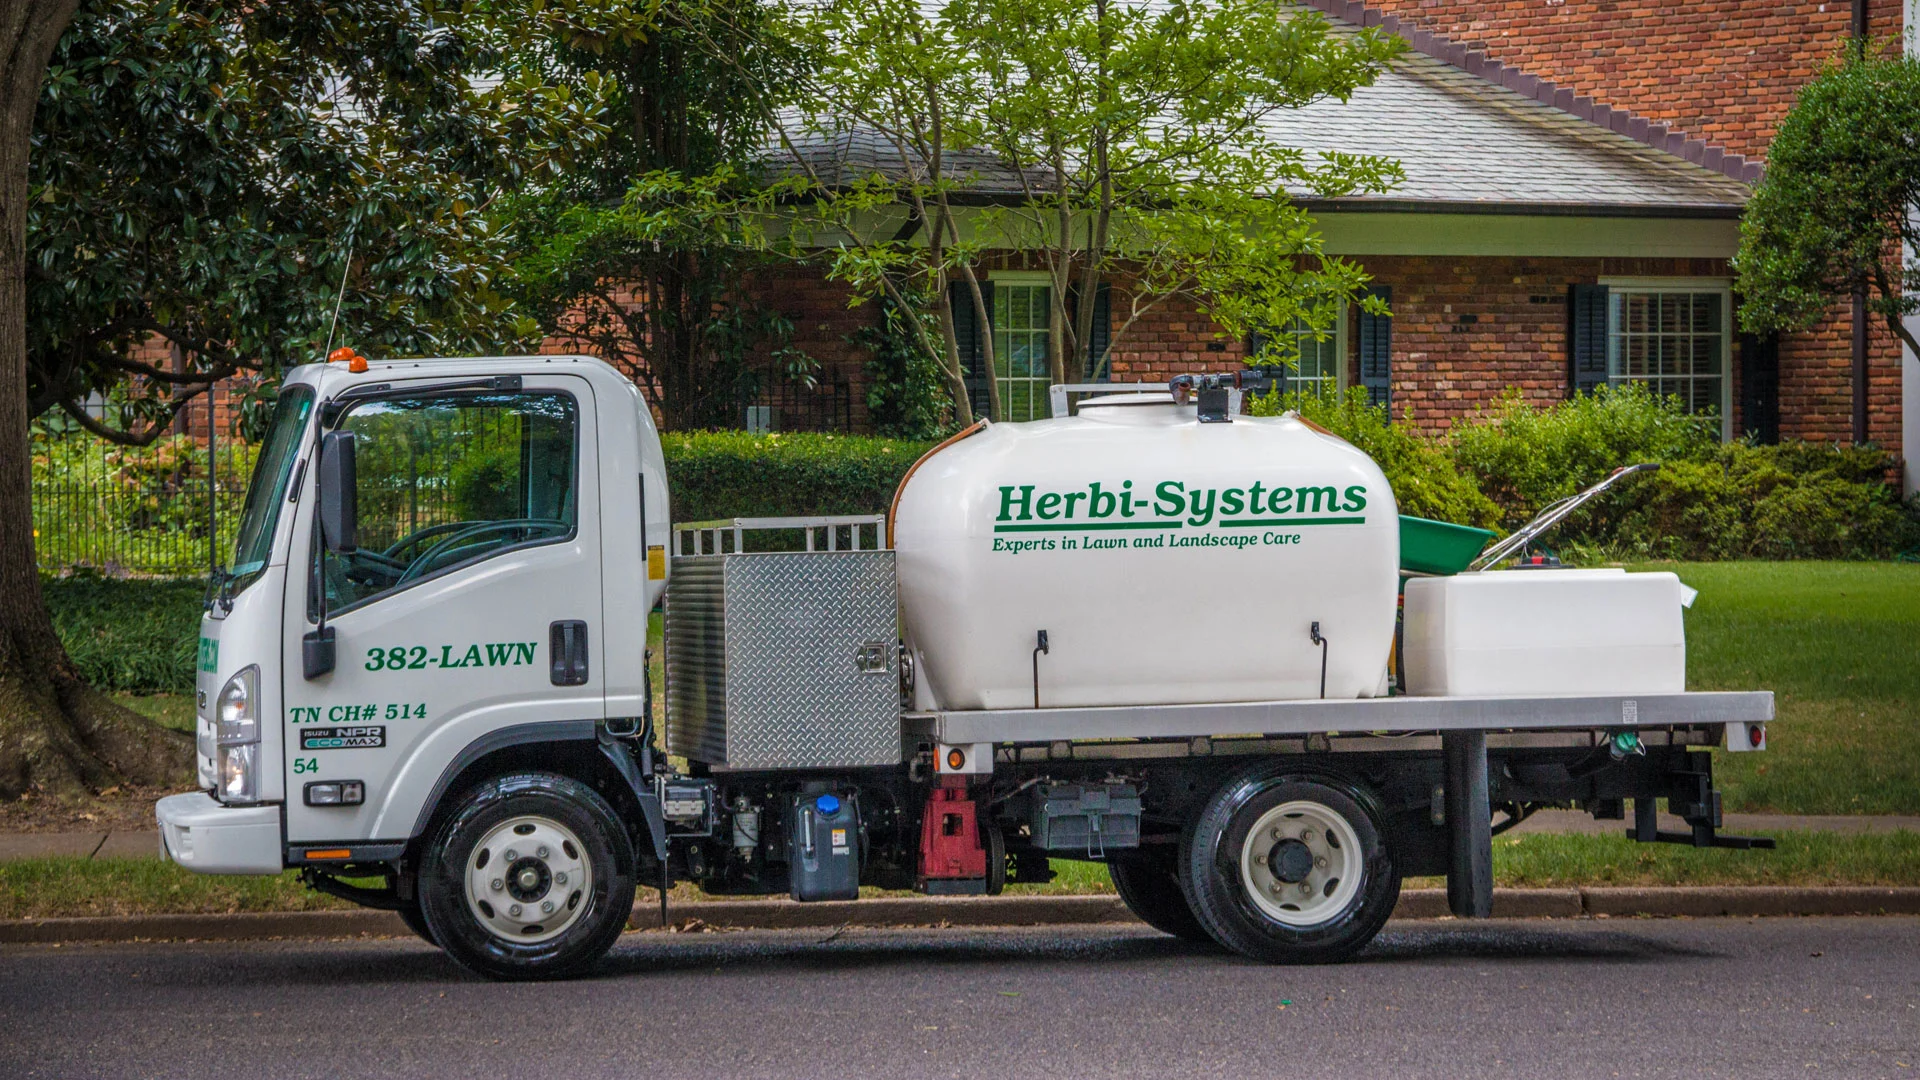 Herbi-Systems truck.